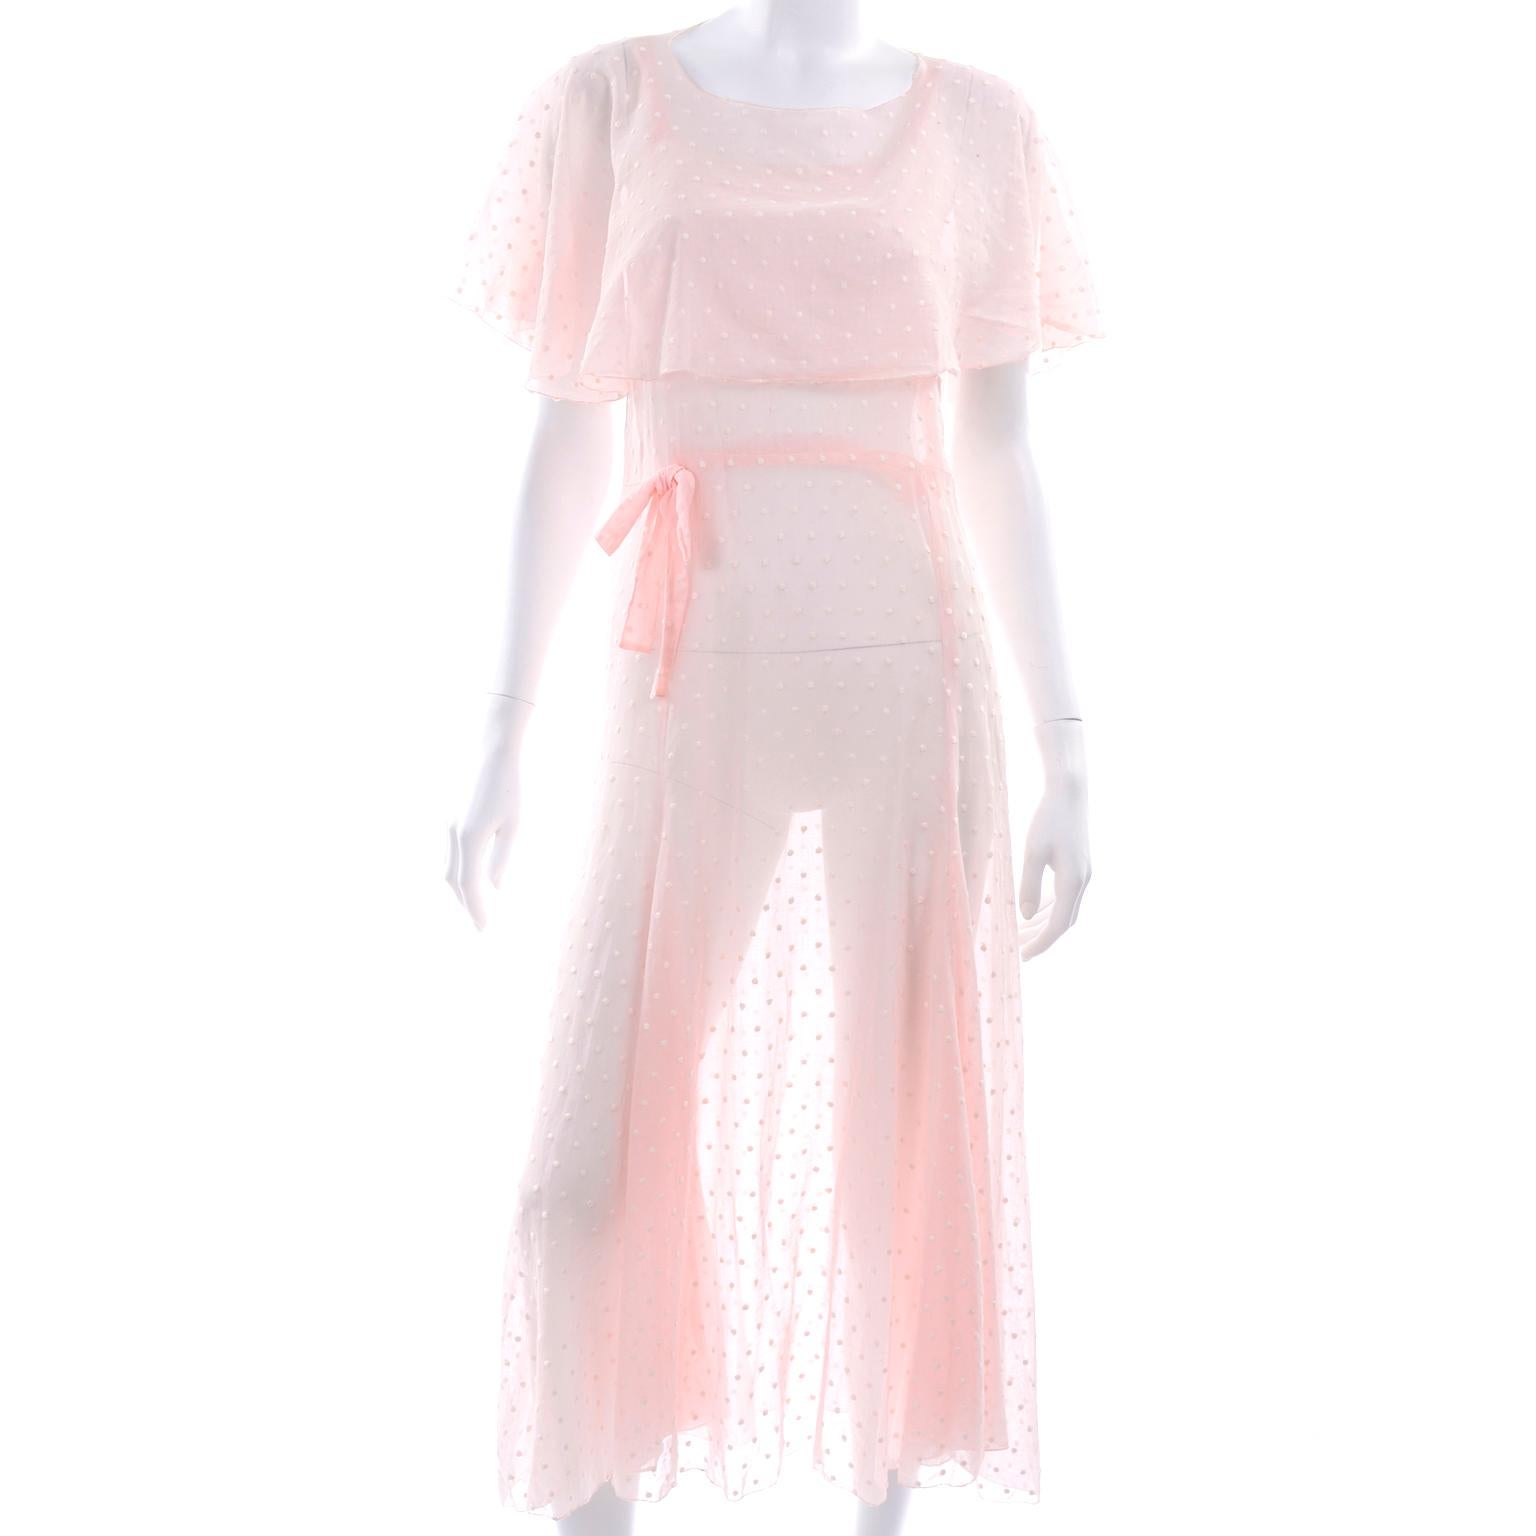 Women's 1930s Vintage Pink White Polka Dot Dress With Butterfly Capelet For Sale